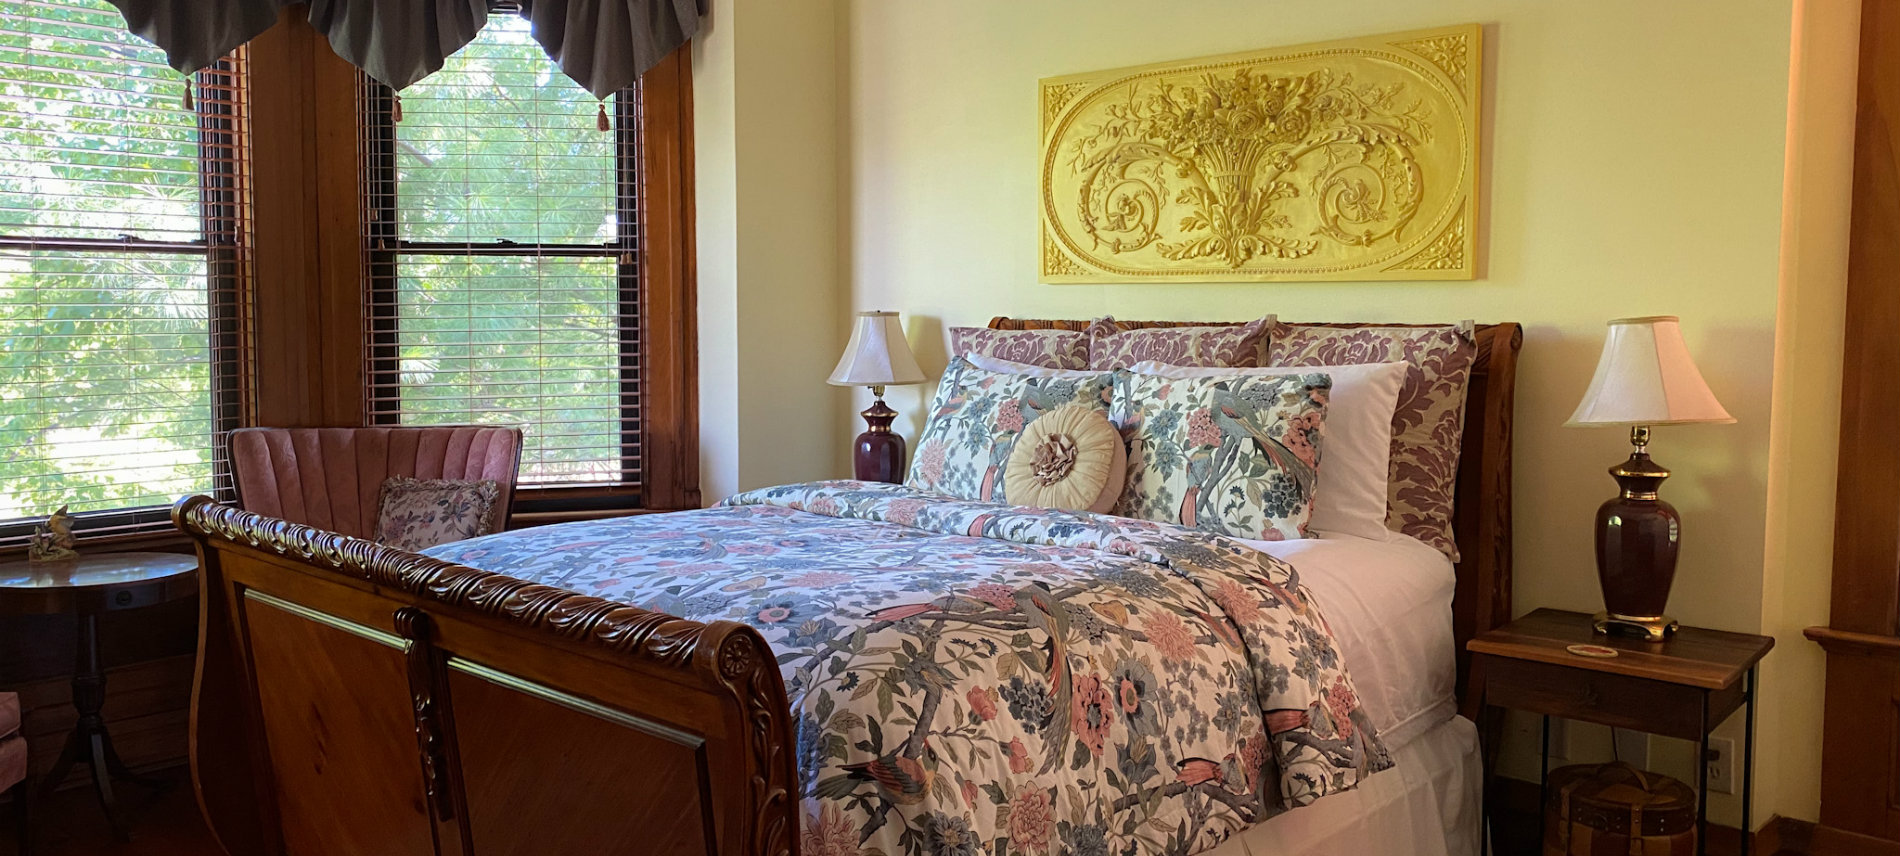 Sleigh bed with floral comforter